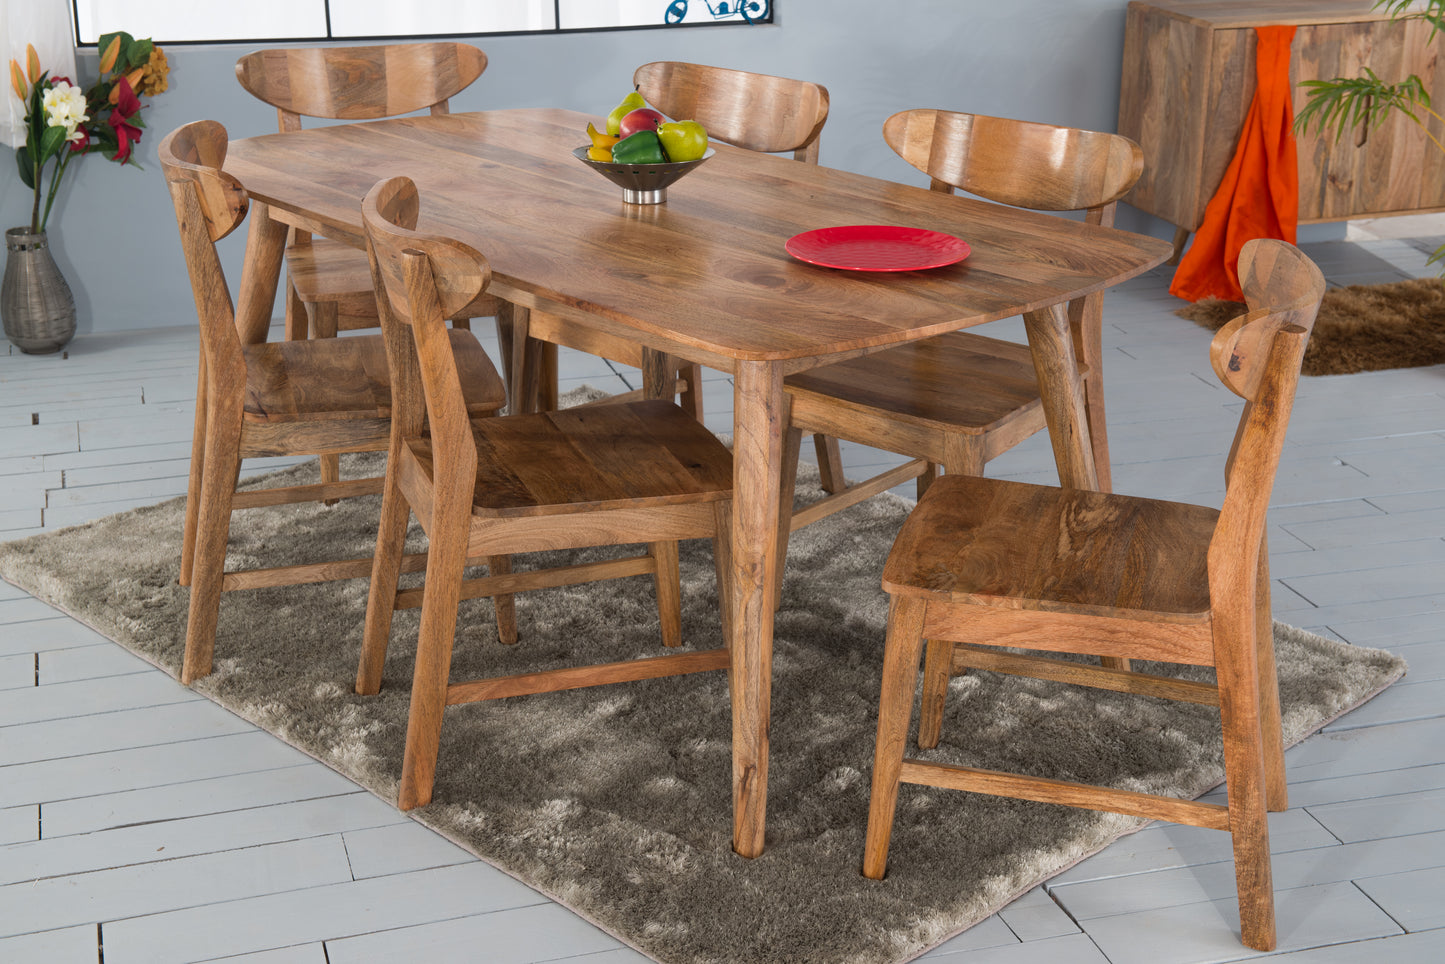 Surya Small Dining Table